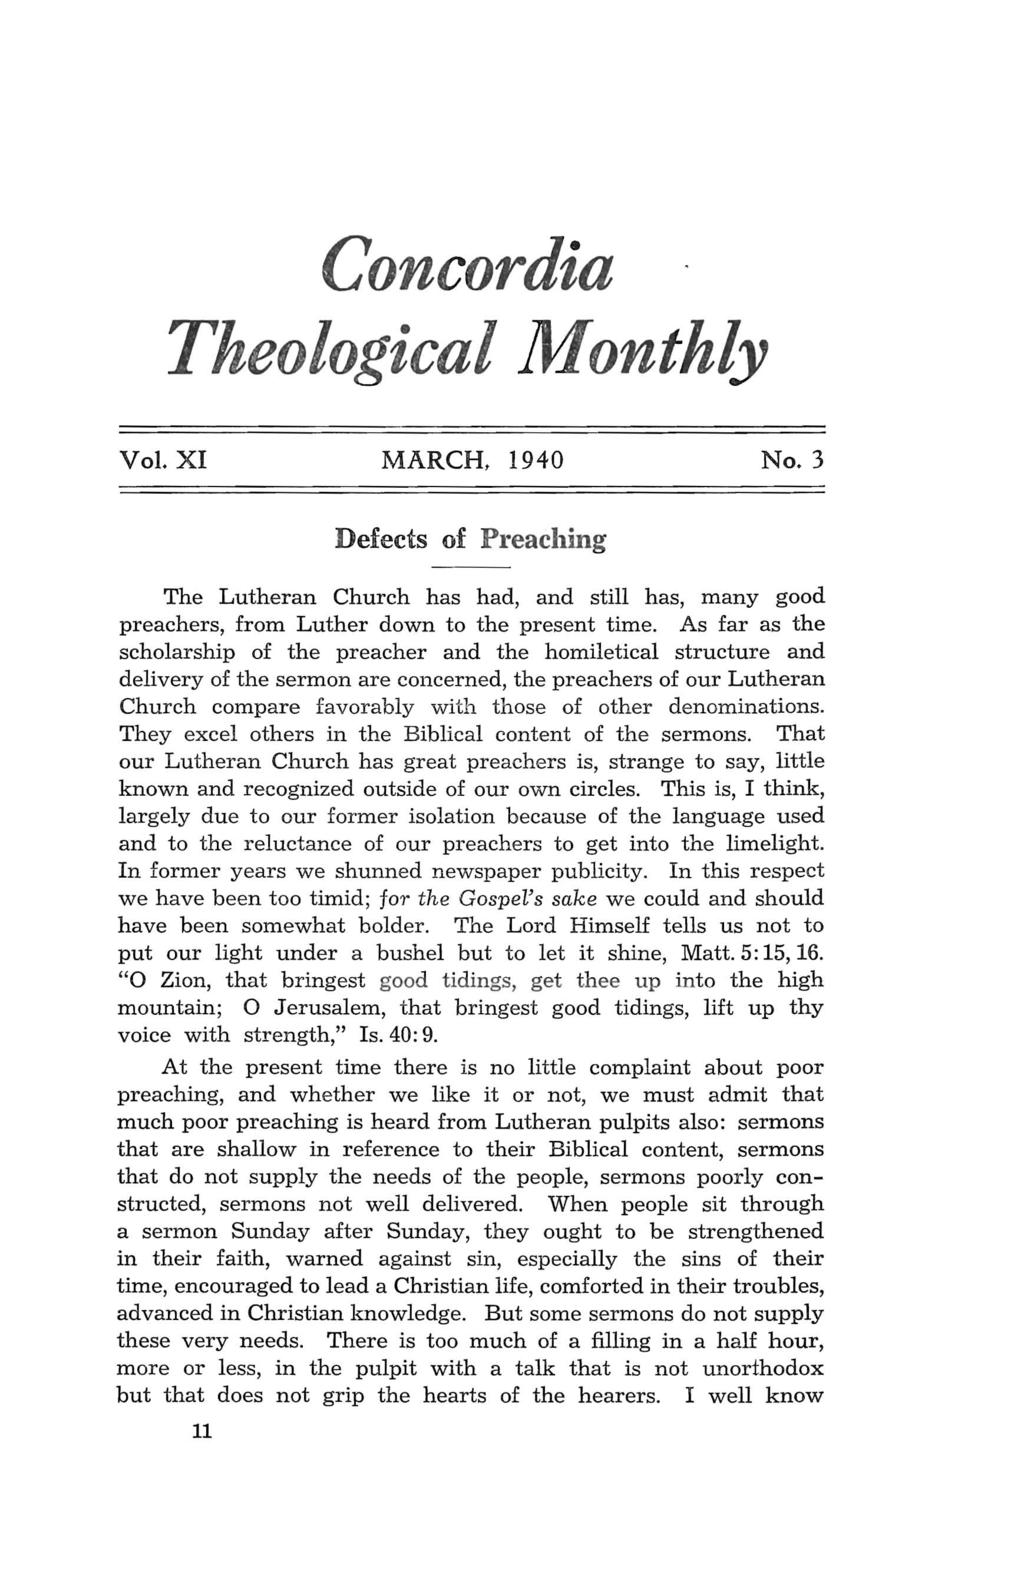 Concordia Theological Monthly Vol. XI MARCH, 1940 No.3 Defects of Preaching The Lutheran Church has had, and still has, many good preachers, from Luther down to the present time.